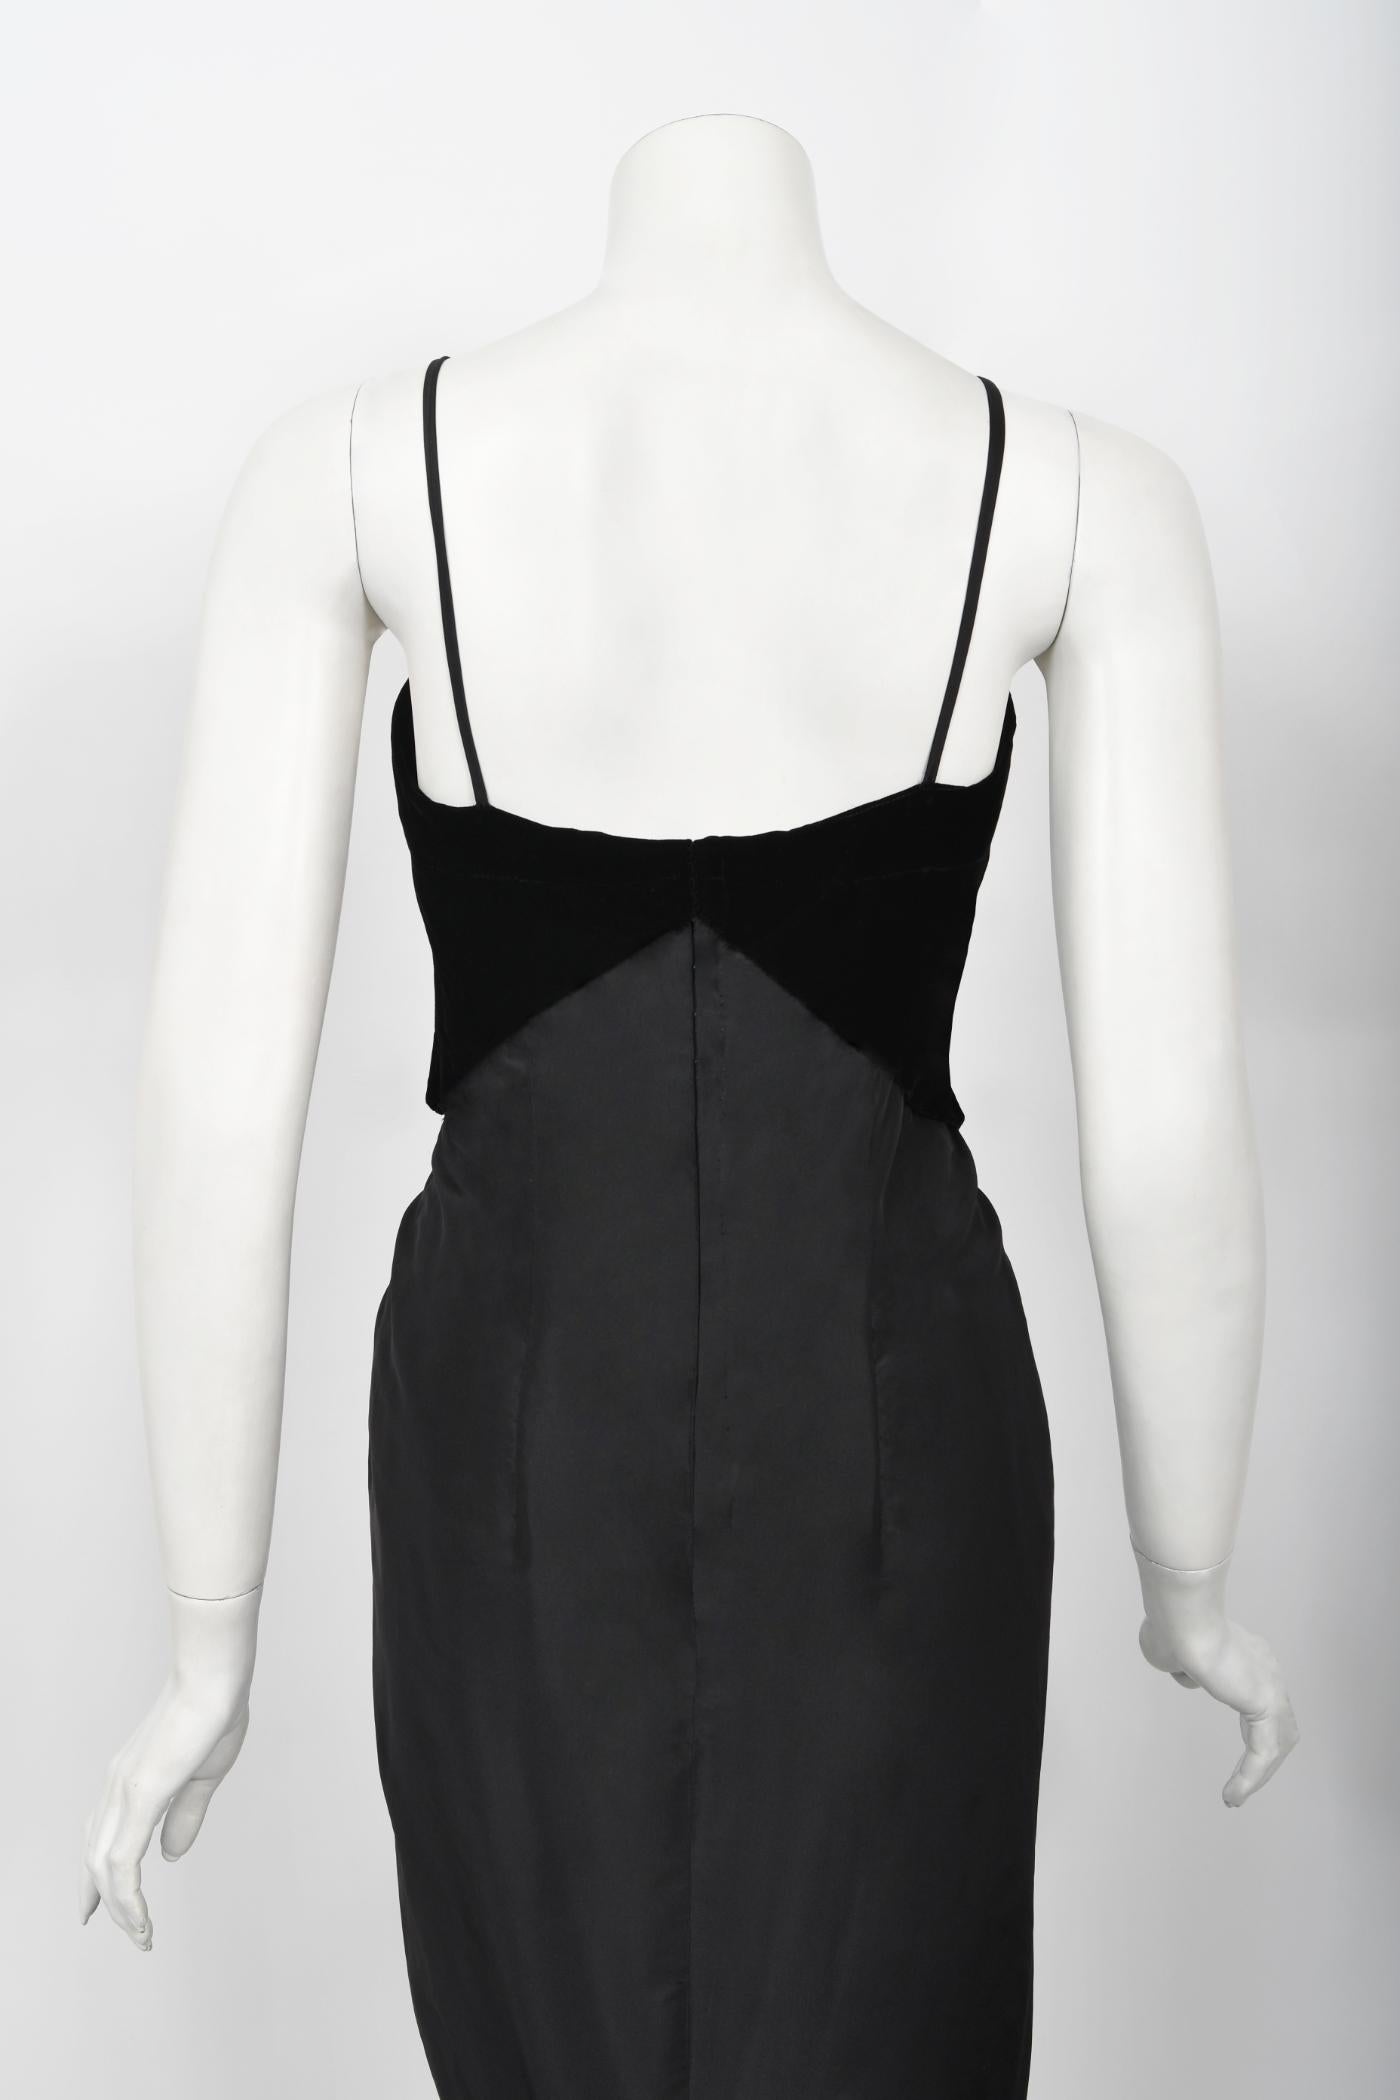 Vintage 1950's Philip Hulitar Old Hollywood Black Silk Hourglass Fishtail Dress For Sale 7